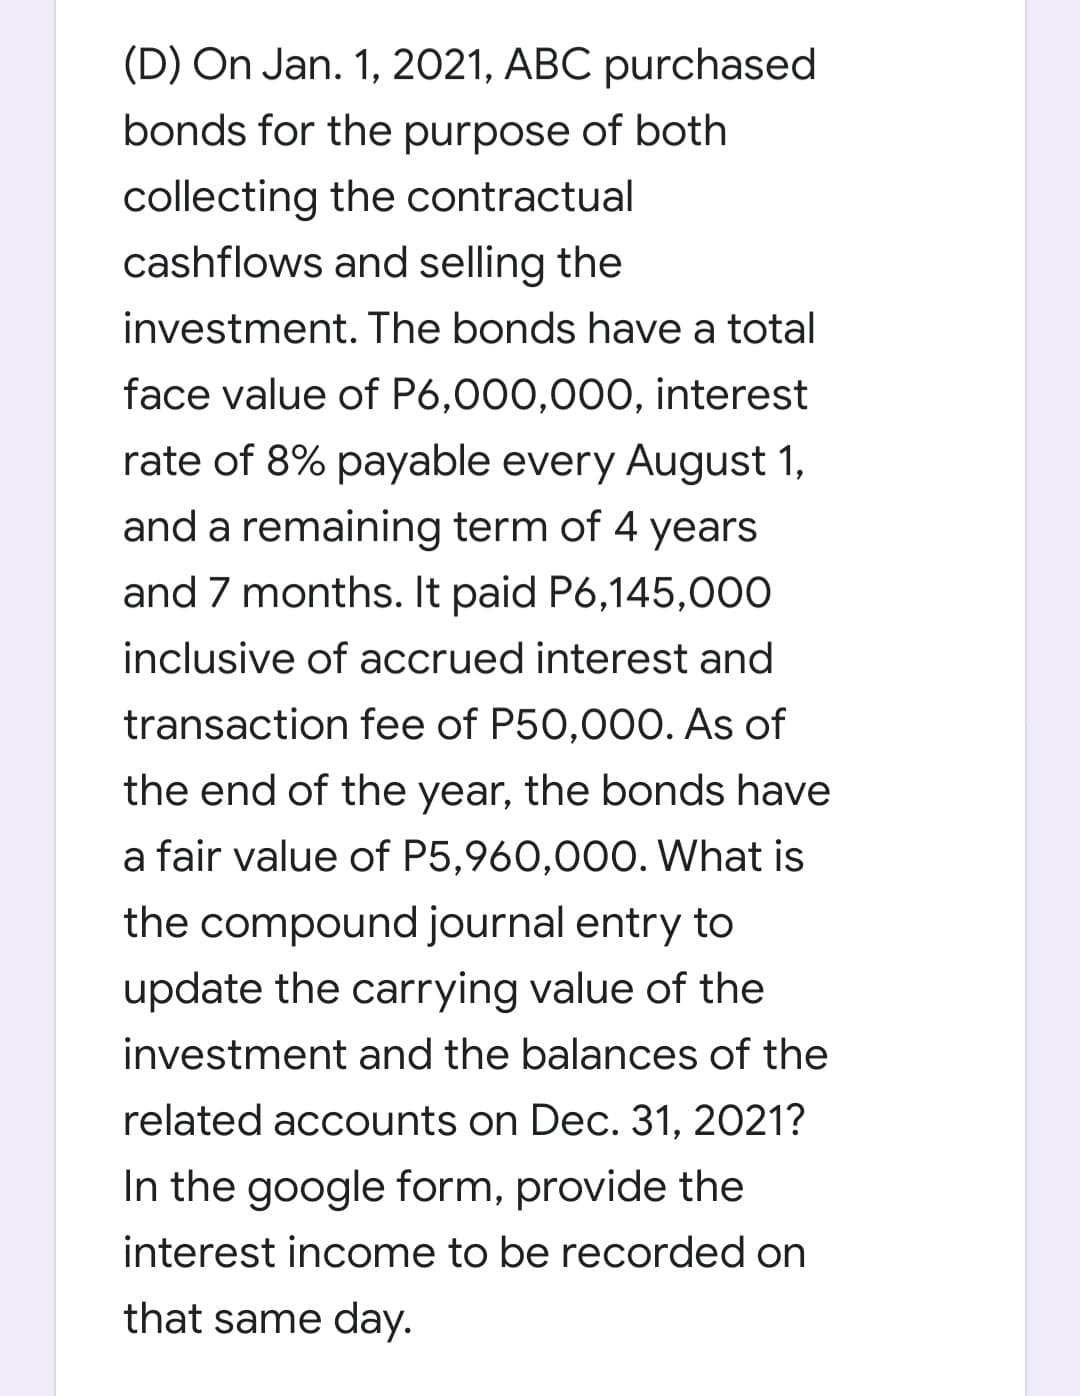 (D) On Jan. 1, 2021, ABC purchased
bonds for the purpose of both
collecting the contractual
cashflows and selling the
investment. The bonds have a total
face value of P6,000,000, interest
rate of 8% payable every August 1,
and a remaining term of 4 years
and 7 months. It paid P6,145,000
inclusive of accrued interest and
transaction fee of P50,000. As of
the end of the year, the bonds have
a fair value of P5,960,000. What is
the compound journal entry to
update the carrying value of the
investment and the balances of the
related accounts on Dec. 31, 2021?
In the google form, provide the
interest income to be recorded on
that same day.
